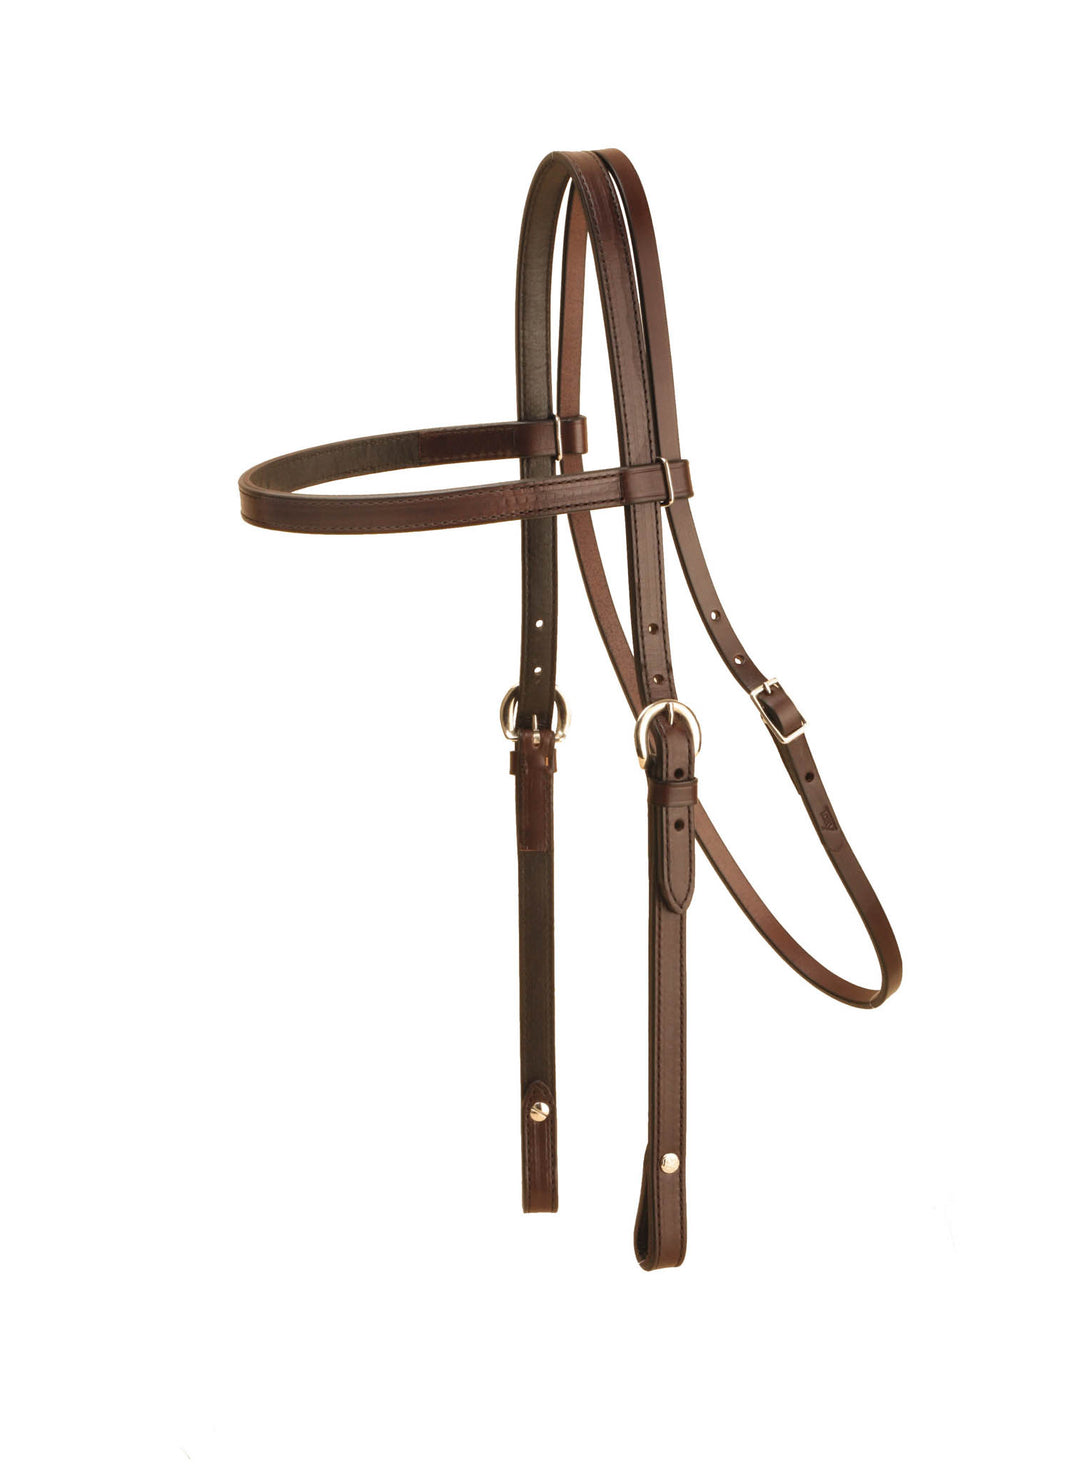 Tory Leather Oversized Brow Band Headstall